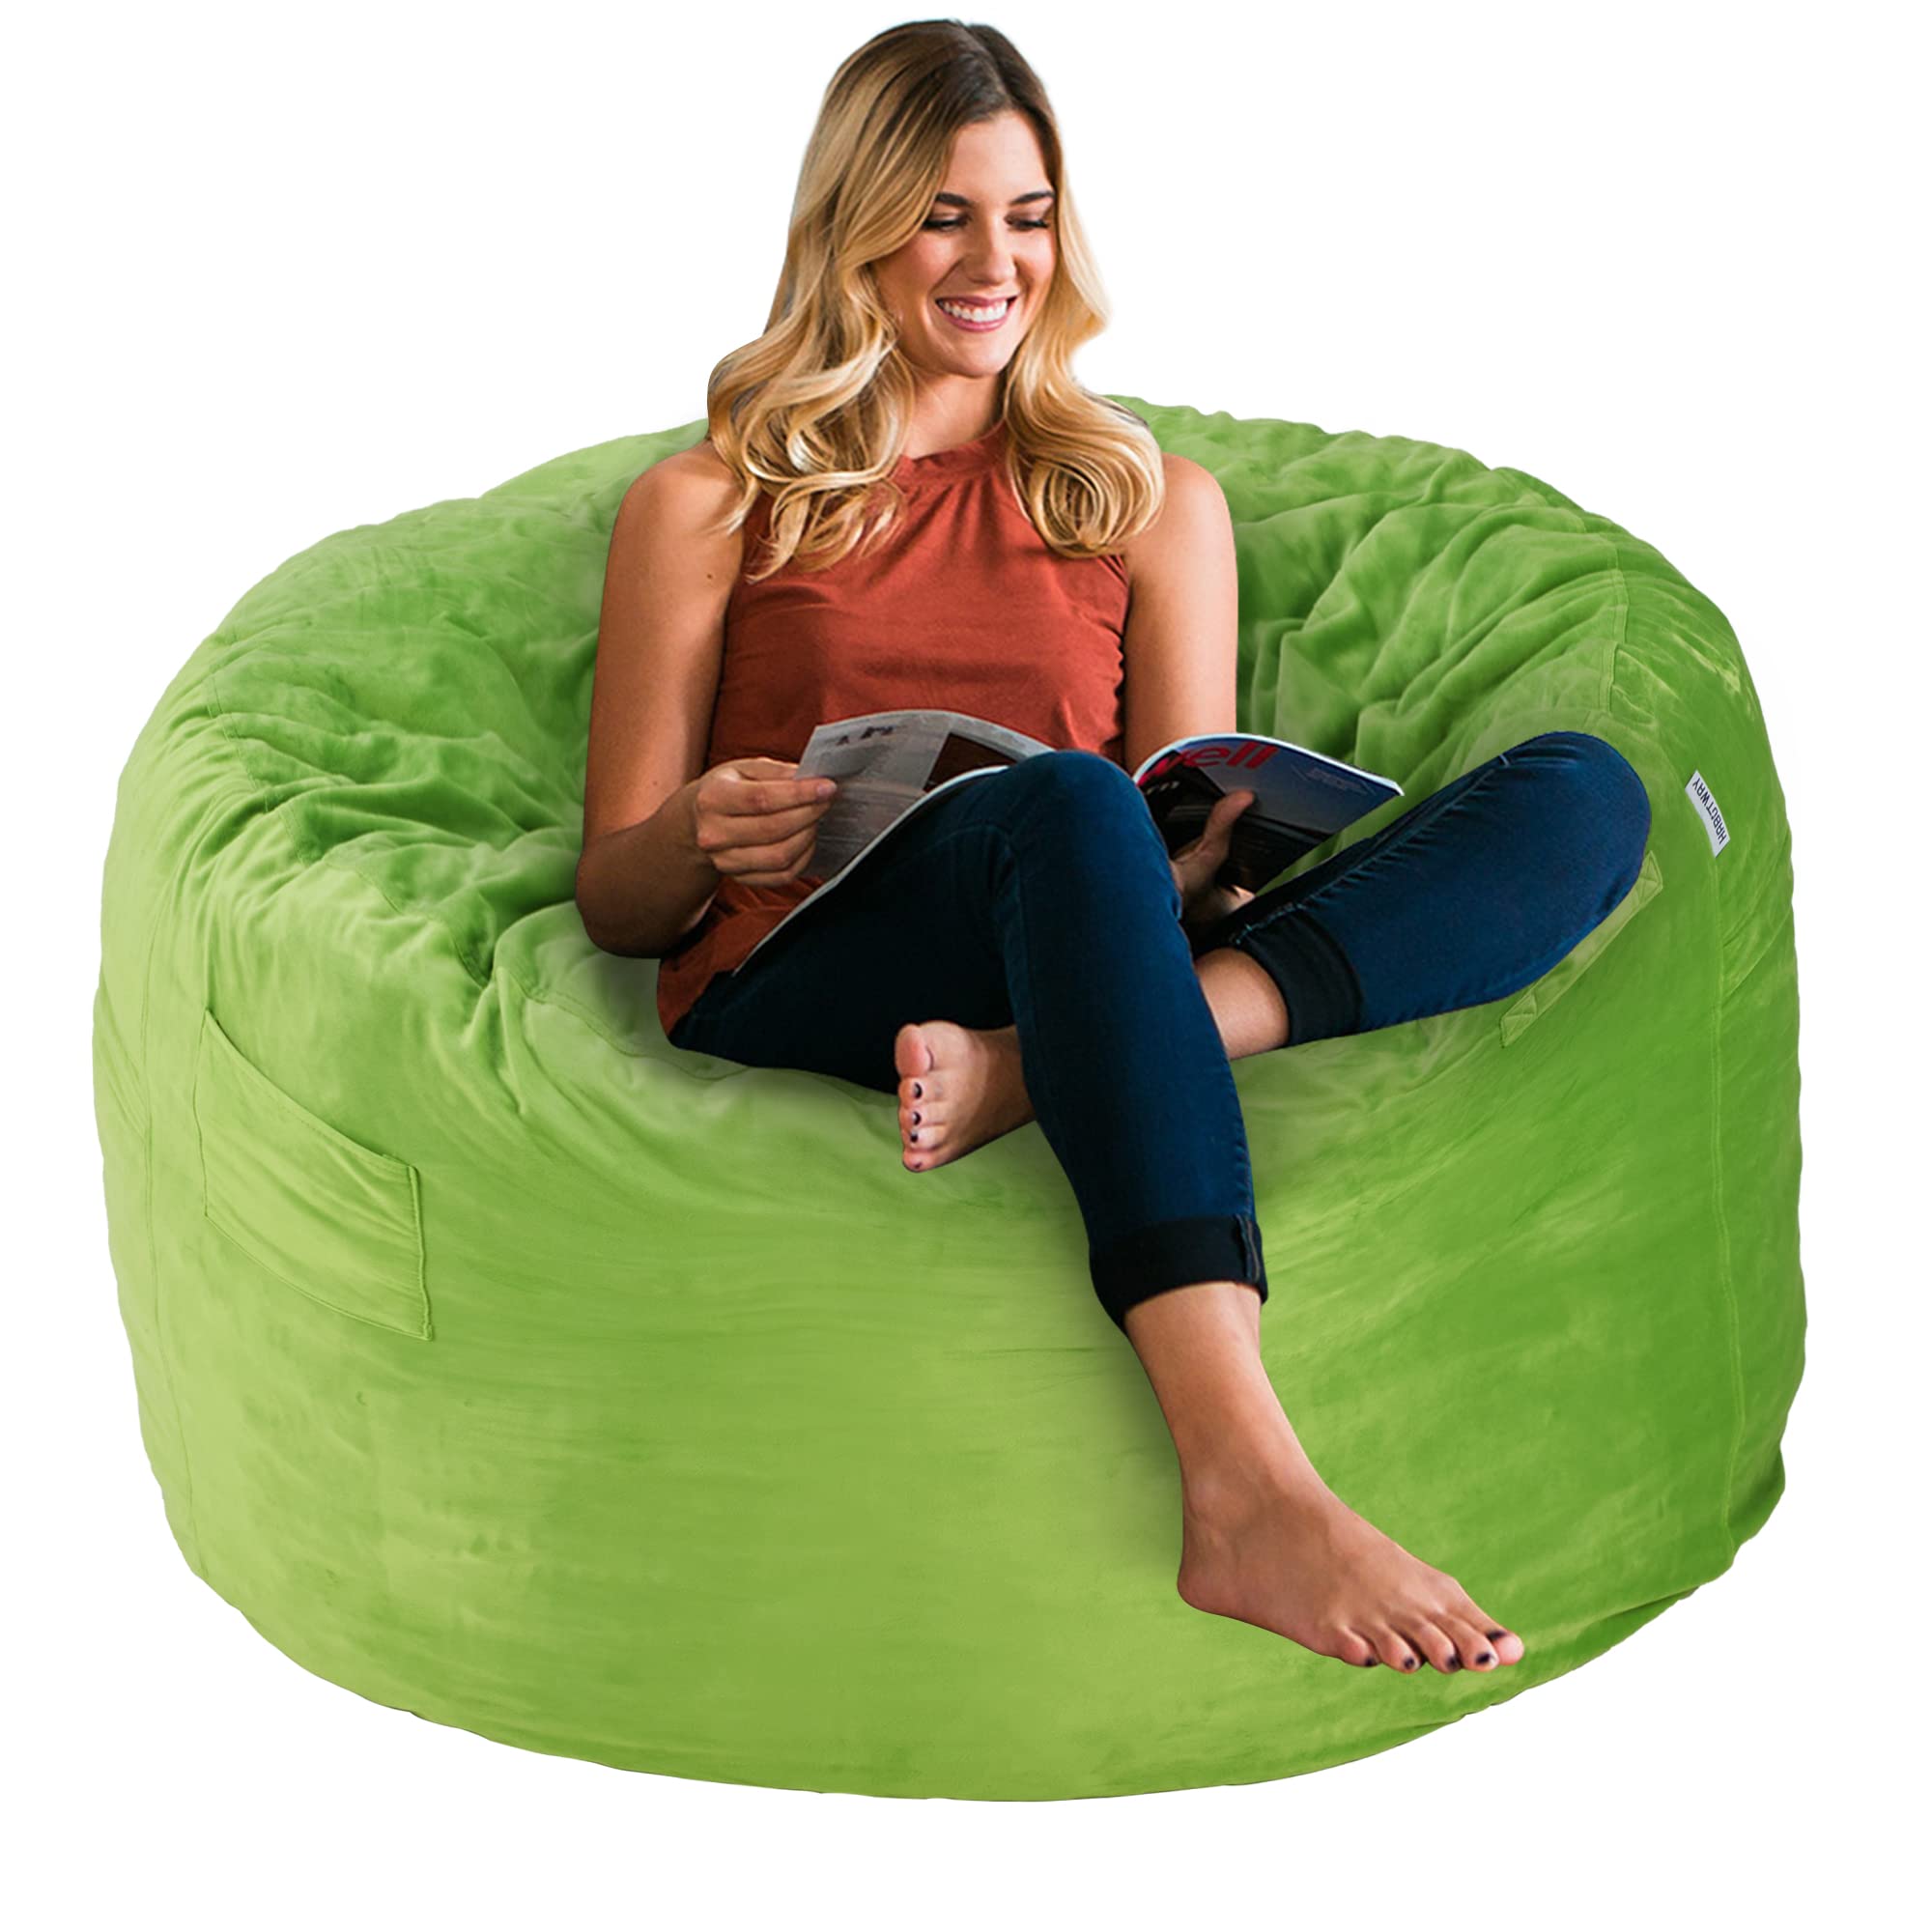 HABUTWAY Bean Bag Chair 3Ft Luxurious Velvet Ultra Soft Fur with High-Rebound Memory Foam Bean Bag Chairs for Adults Plush Lazy 